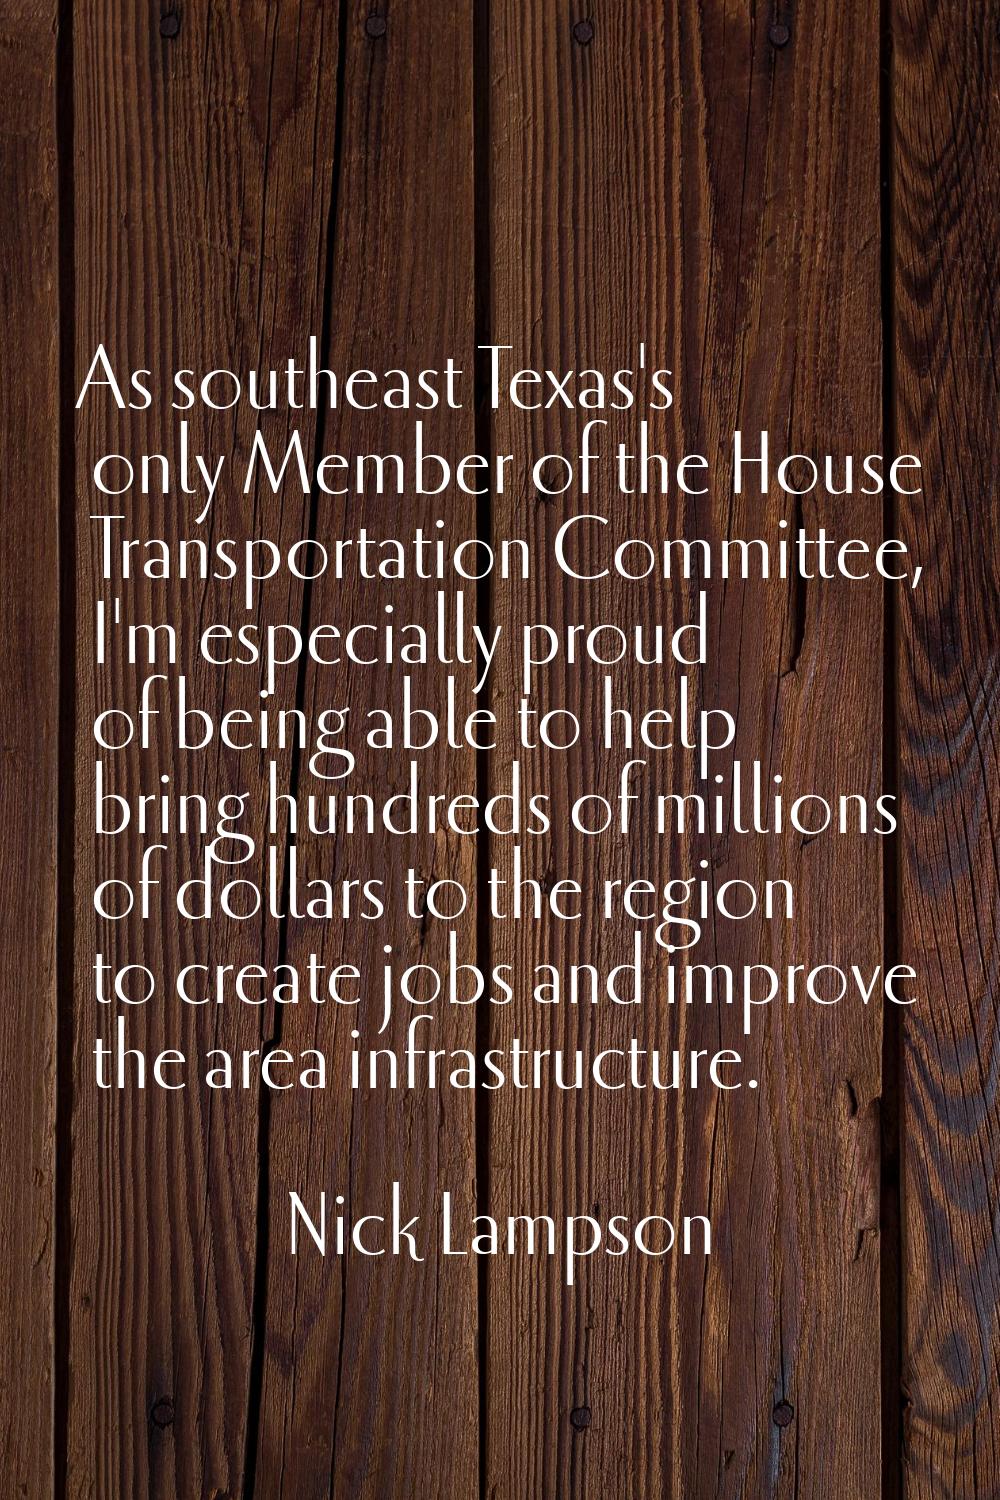 As southeast Texas's only Member of the House Transportation Committee, I'm especially proud of bei